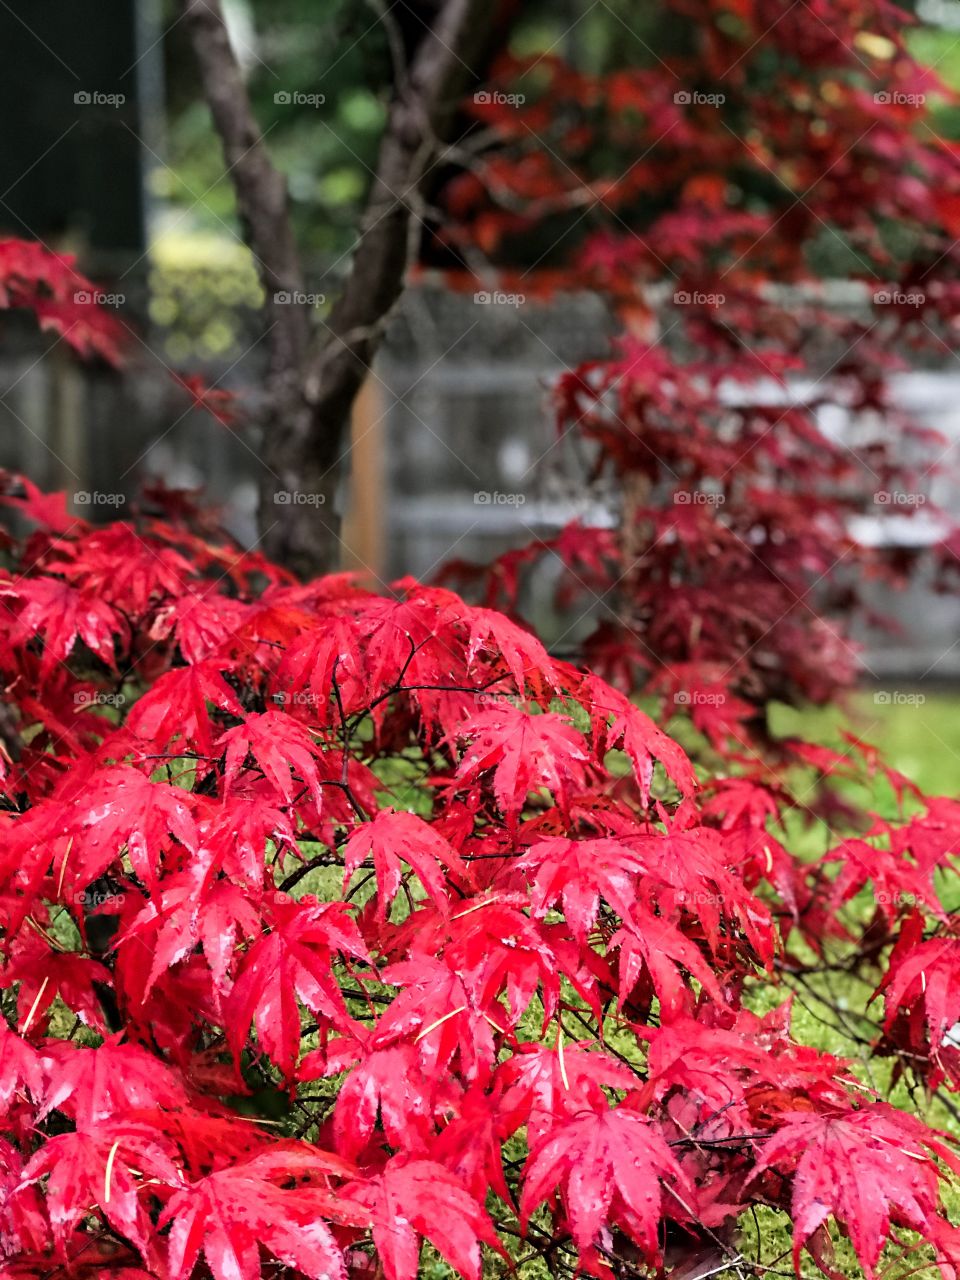 The fiery crimson leaves on my Japanese maple tree  are wet with rain but the moisture on the leaves only serves to intensify the colour against the contrasting darker leaves, dark bark, wooden fence & the vibrant green of the grass. 🍁